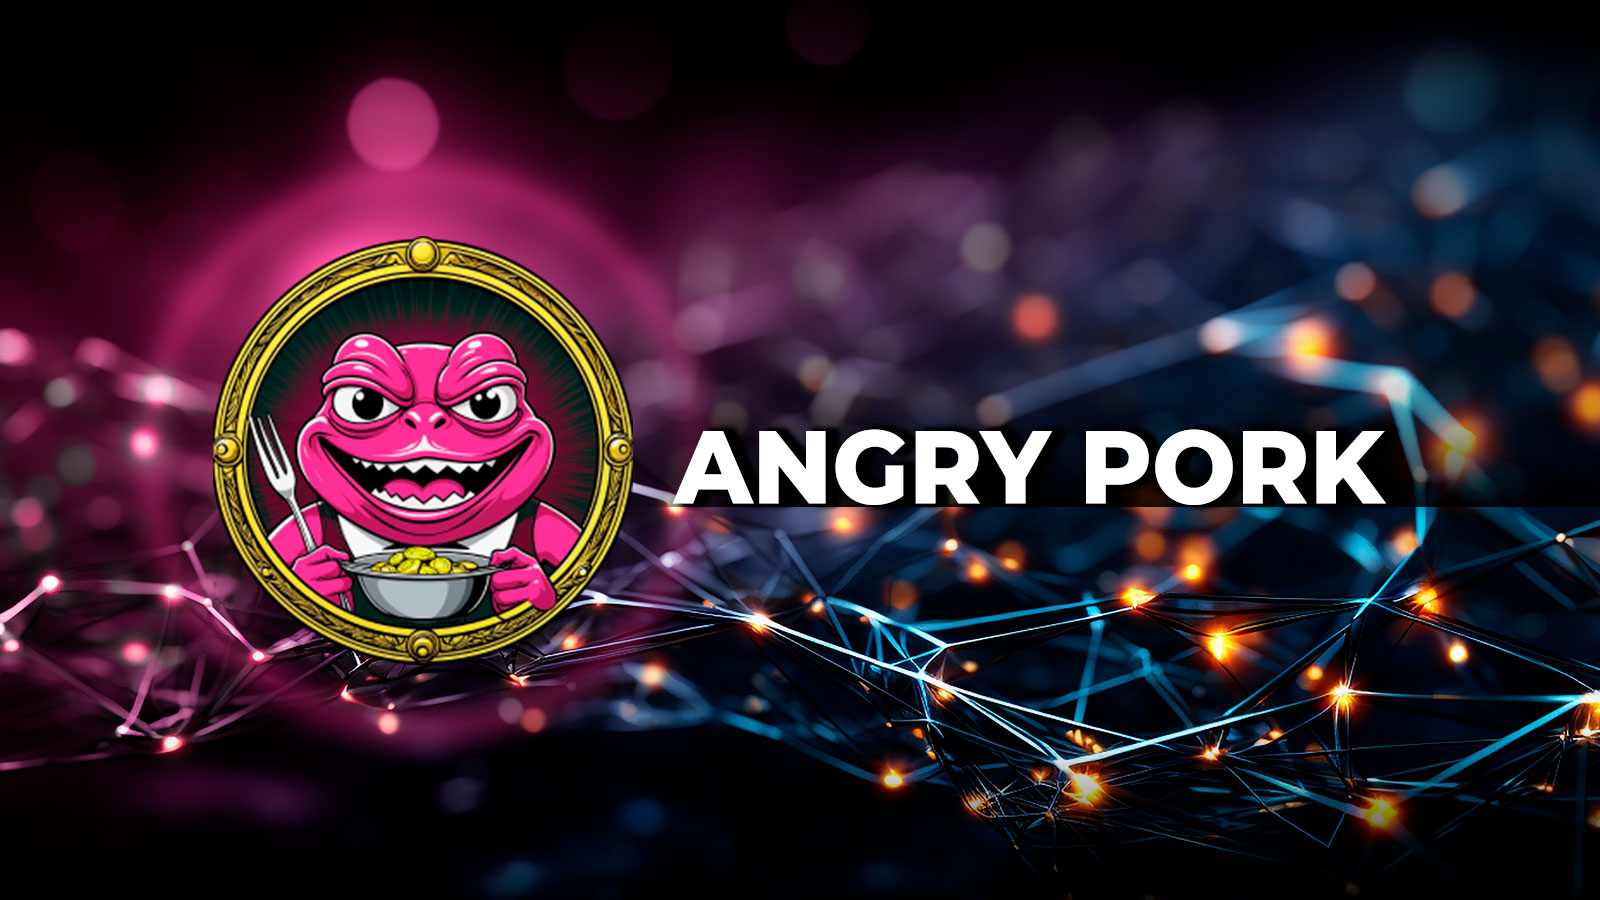 Angry Pepe Fork (APORK) Introduces 'Conquer To Earn', Bitcoin Has Bottomed At $64,000, Solana (SOL) Aiming For Gains 